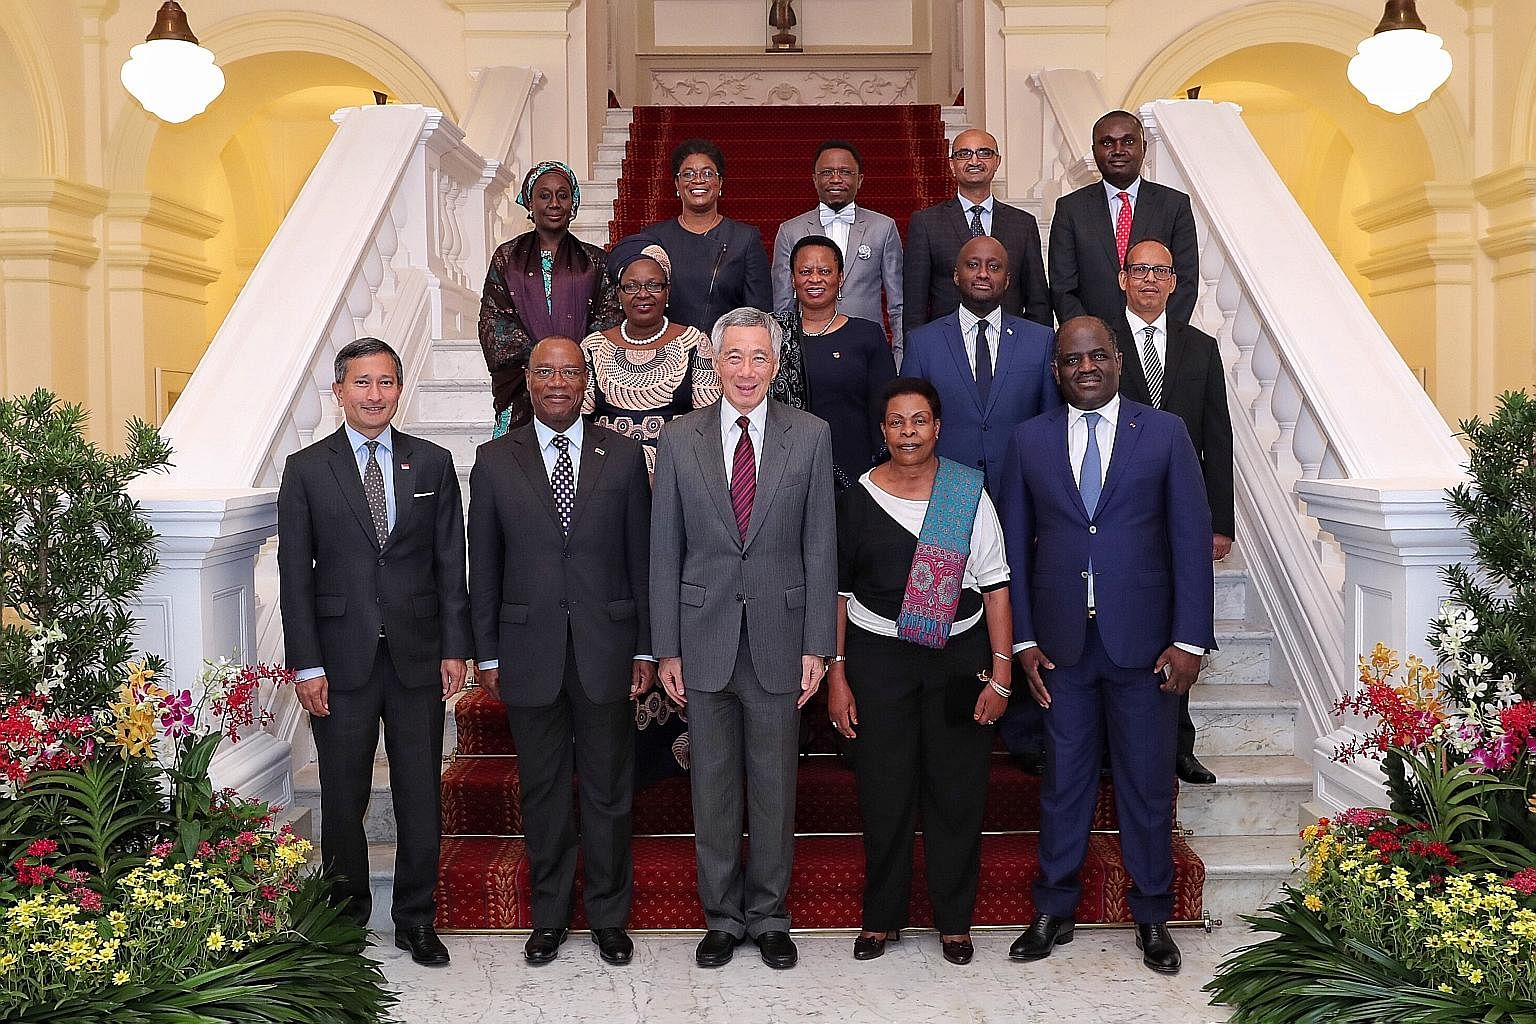 Twelve ministers from African countries with Prime Minister Lee Hsien Loong and Foreign Minister Vivian Balakrishnan at the Istana as part of a two-day visit that began on Monday. Mr Lee and the ministers representing Djibouti, Ethiopia, Gabon, Ghana